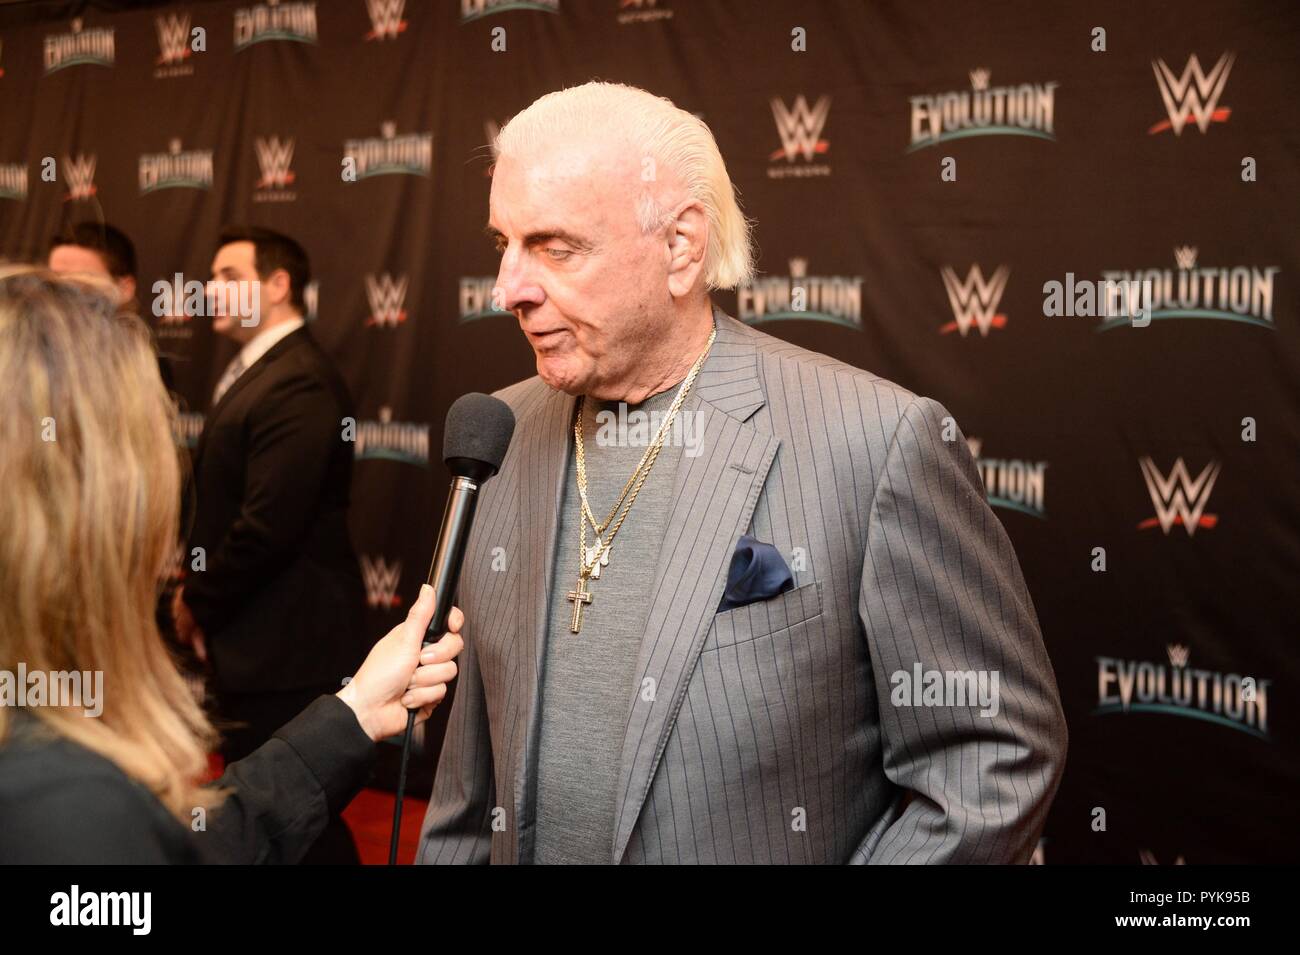 New York, NY, USA. 28th Oct, 2018. Ric Flair at arrivals for WWE Evolution Inaugural All-Women Exclusive Pay-Per-View Event, NYCB Live at Nassau Veterans Memorial Coliseum, New York, NY October 28, 2018. Credit: Eli Winston/Everett Collection/Alamy Live News Stock Photo